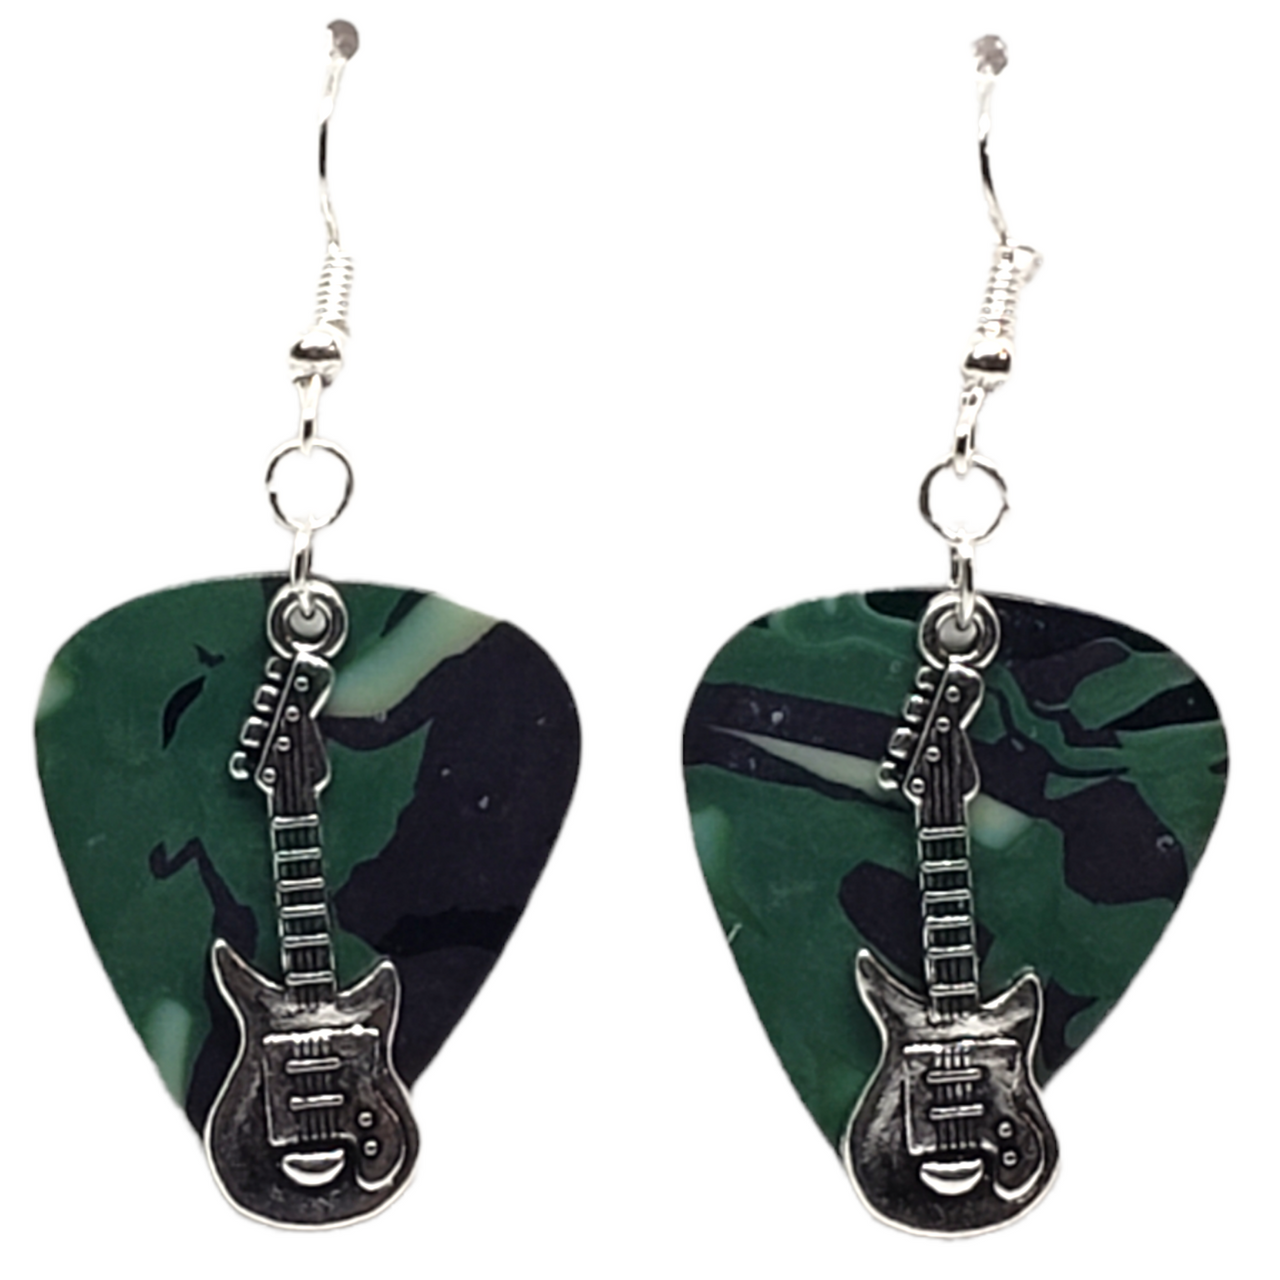 Handmade USA Choose Color Details about   Silver Spider Charm on Guitar Pick Earrings 